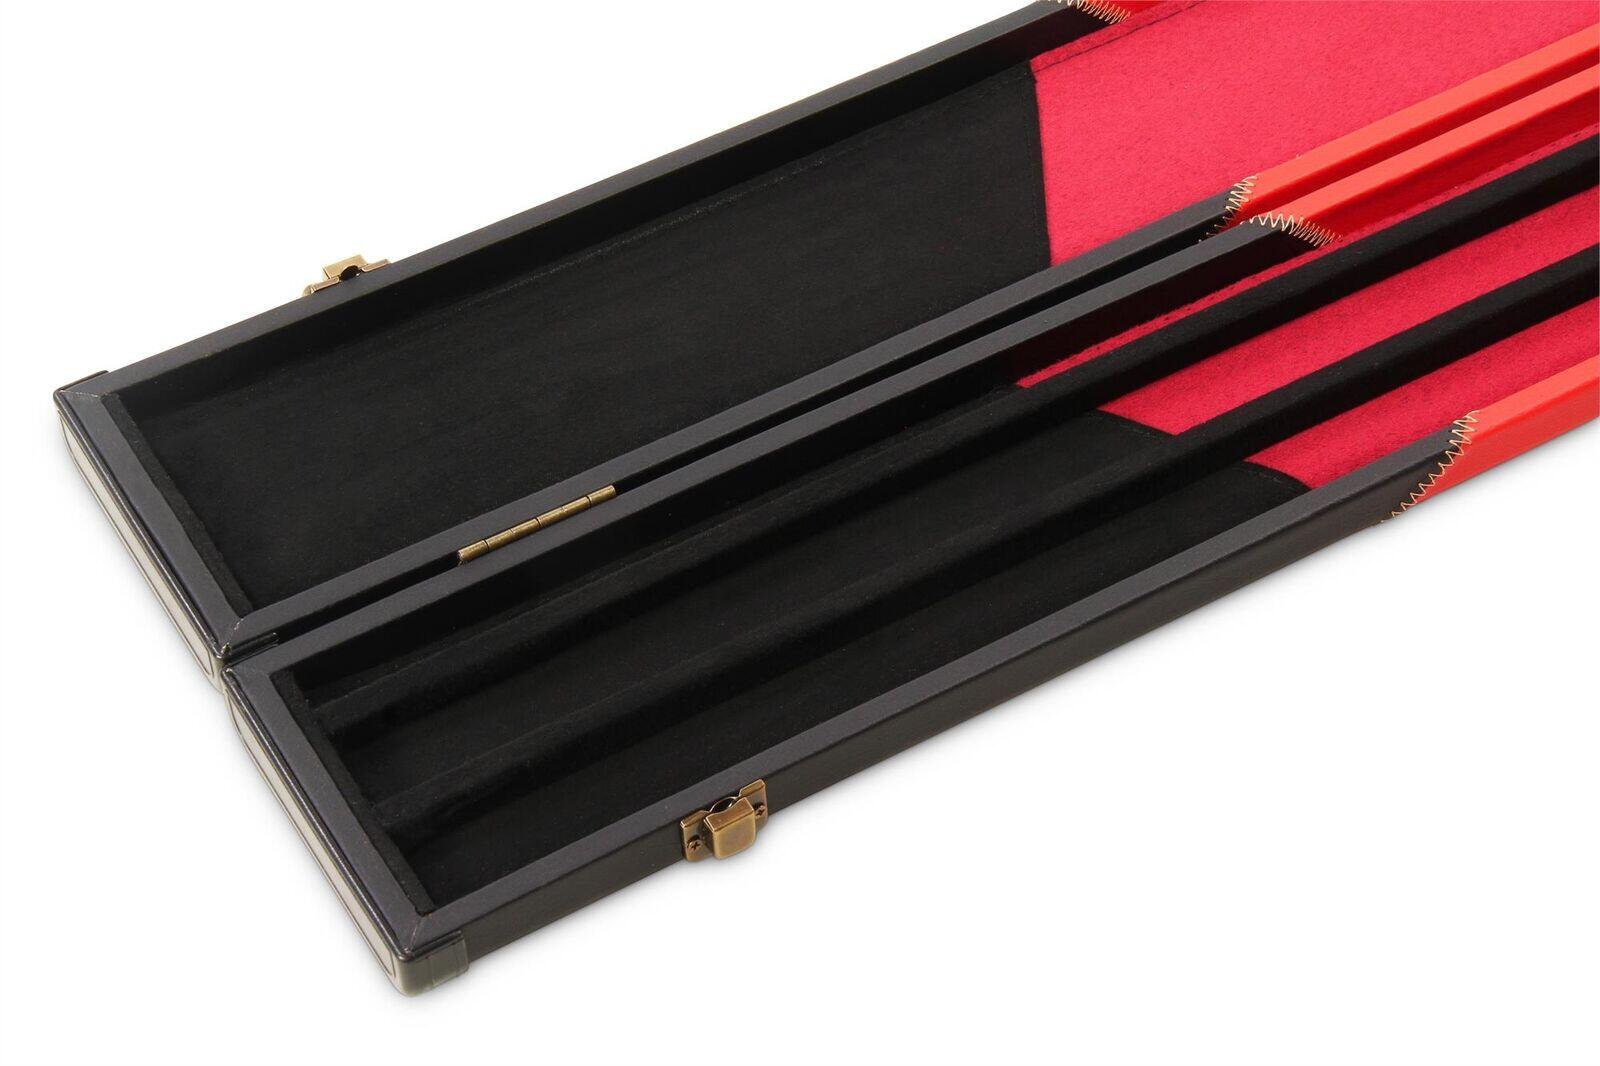 Baize Master 1 Piece WIDE RED ARROW Snooker Pool Cue Case - Holds 3 Cues 7/7